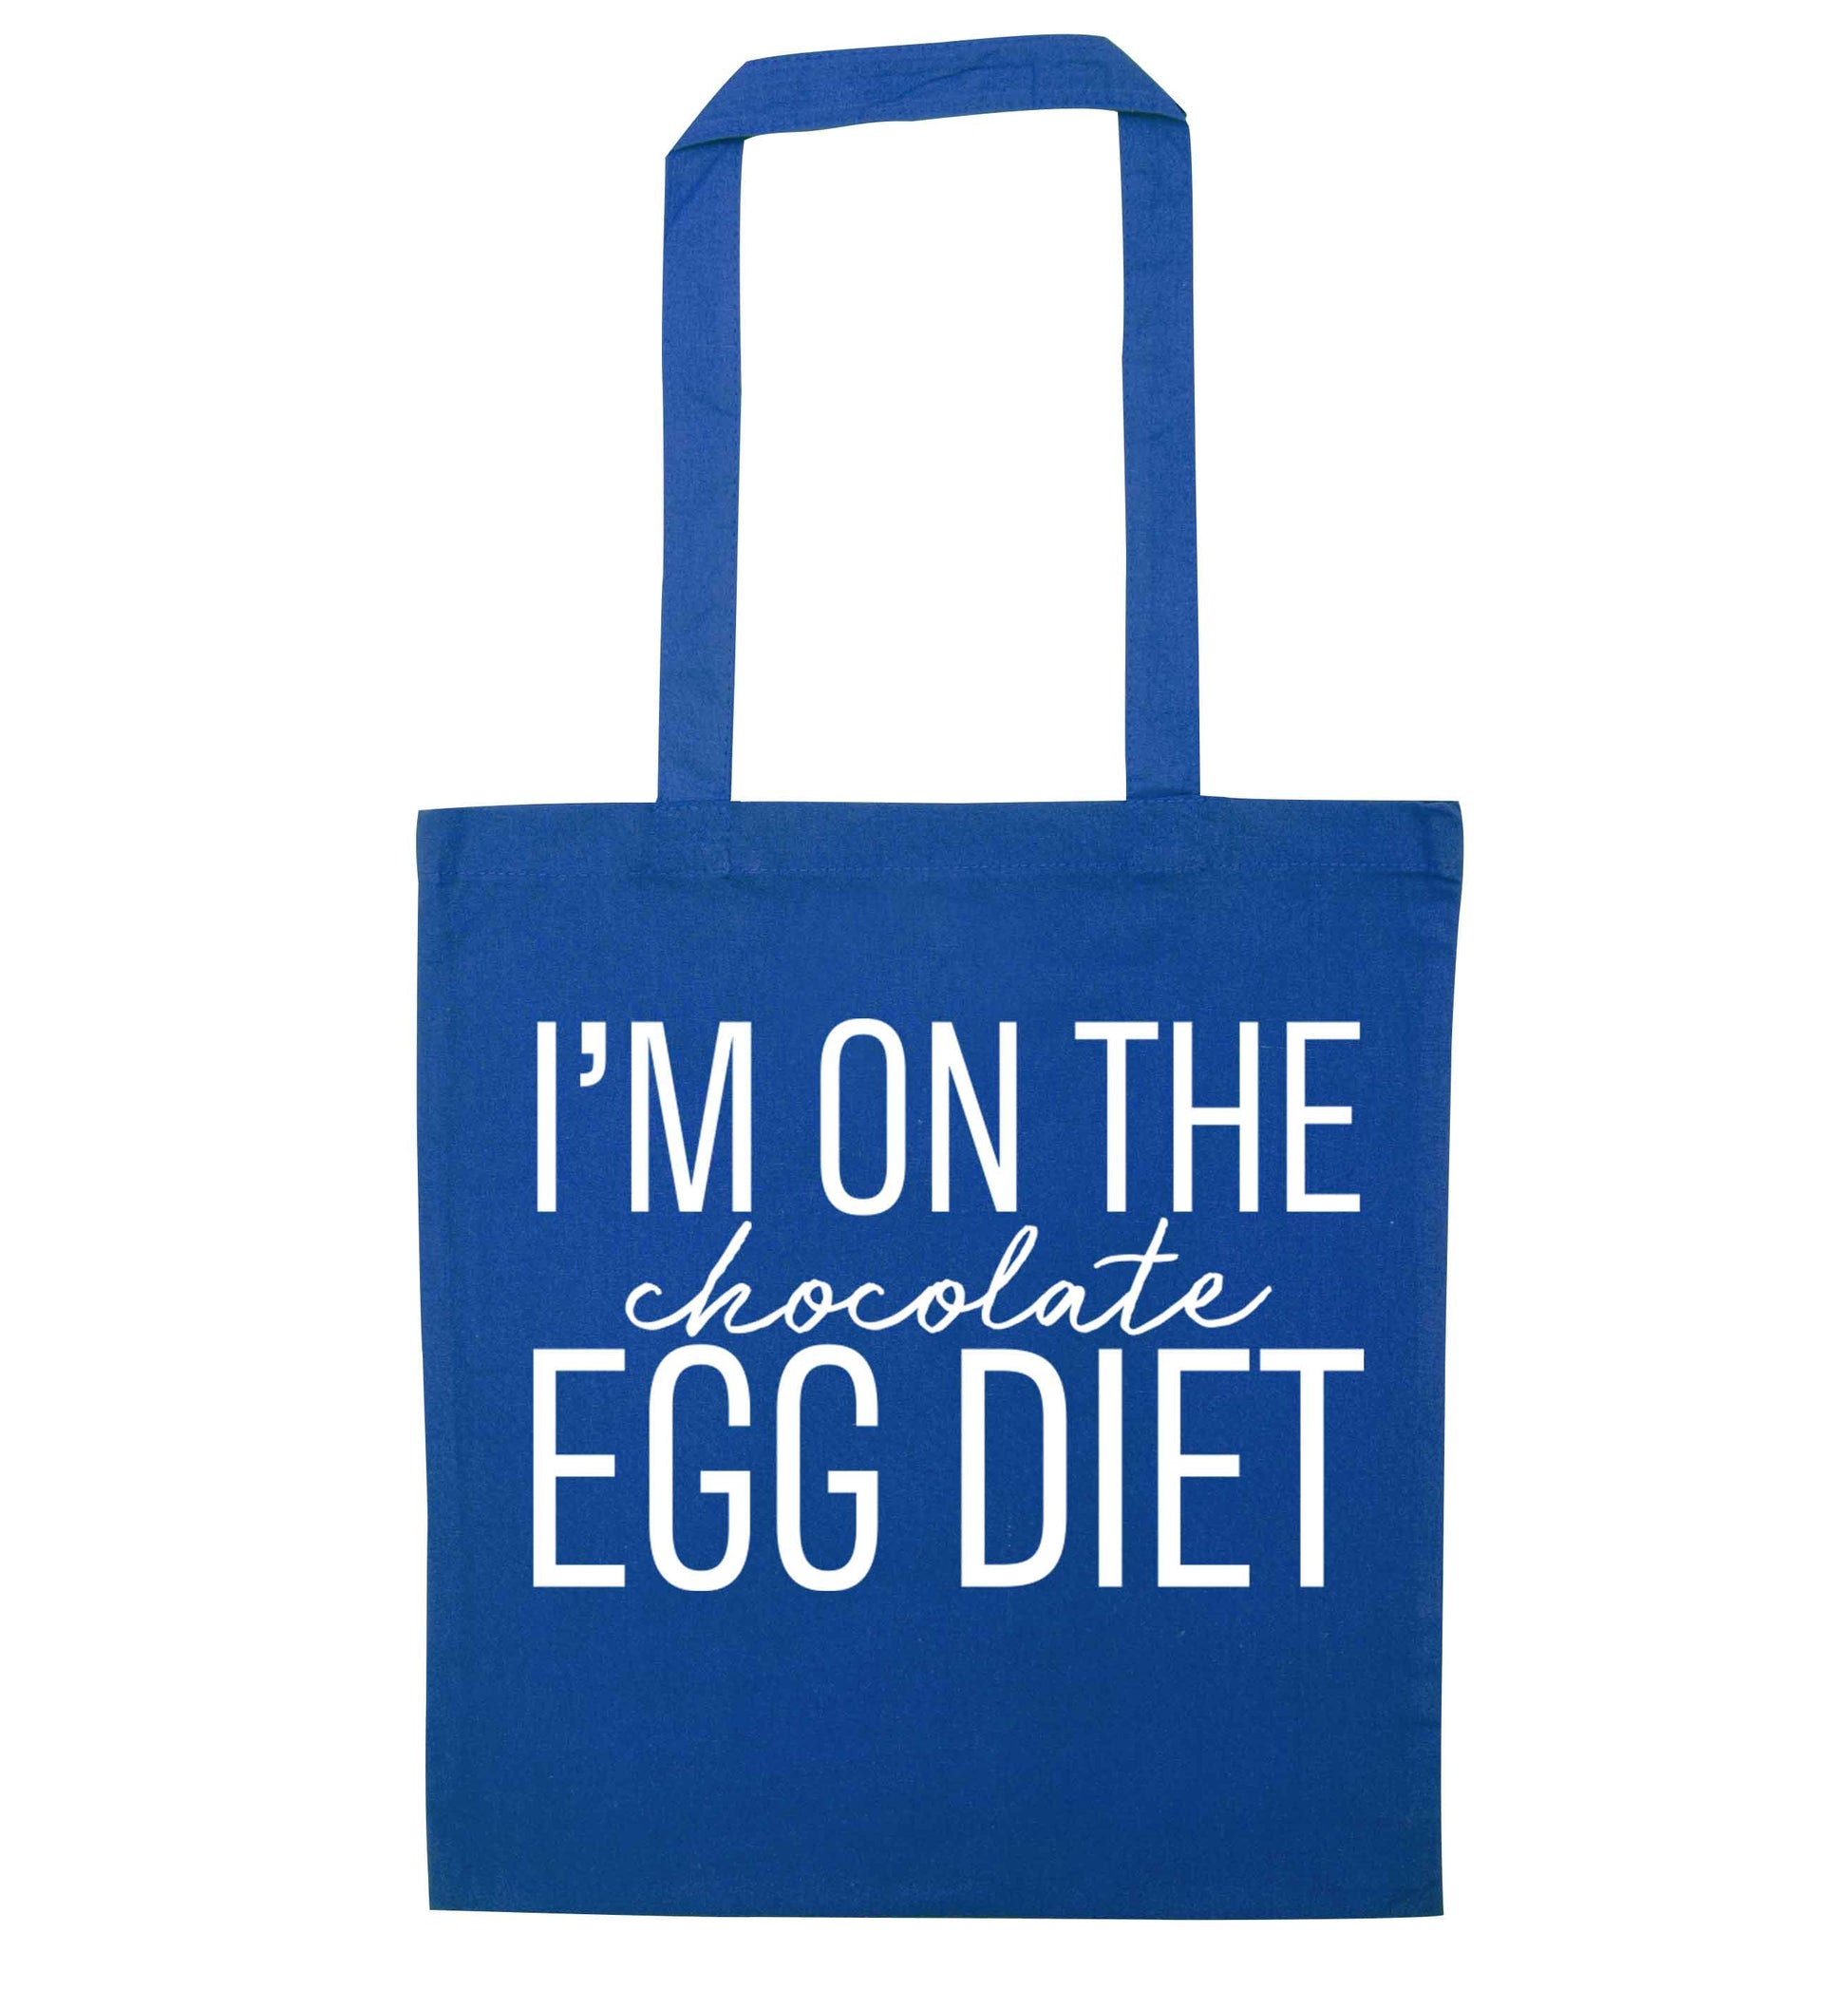 I'm on the chocolate egg diet blue tote bag